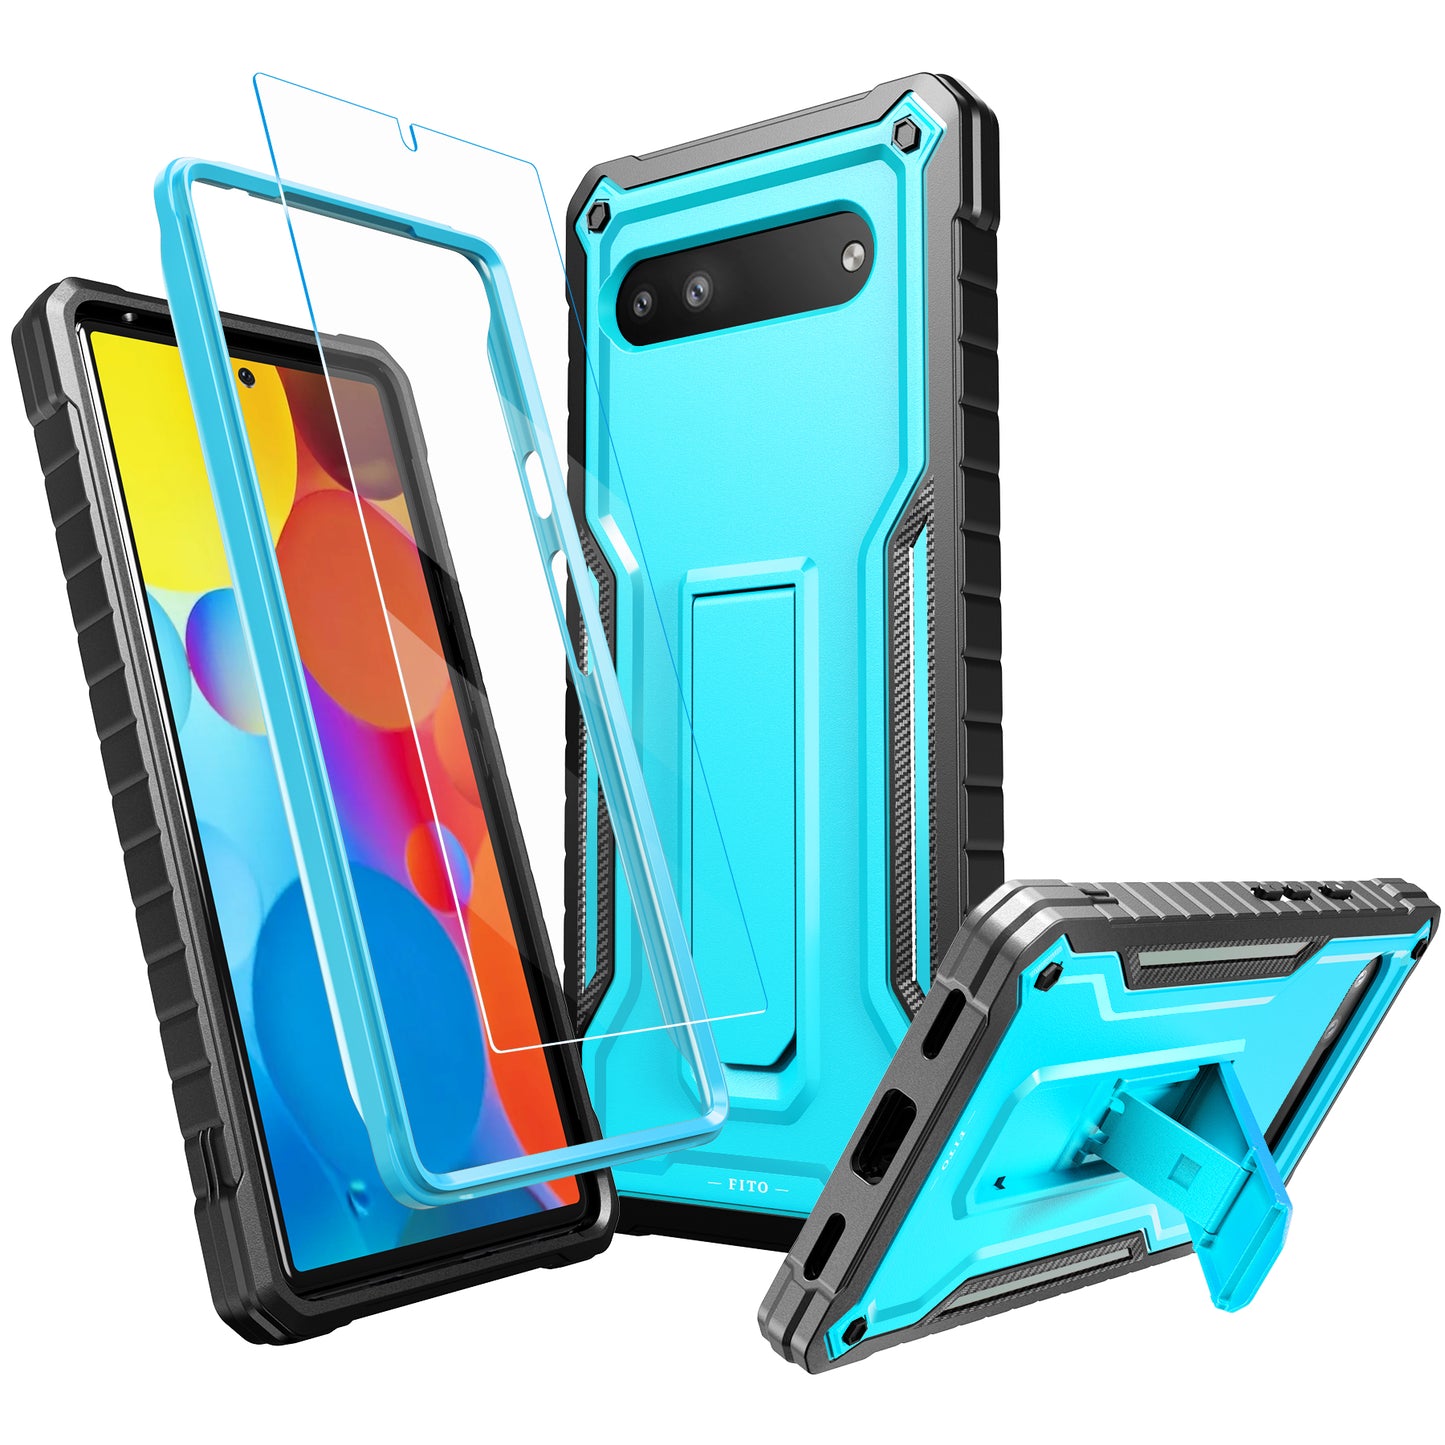 FITO for Google Pixel 6A Case, Dual Layer Shockproof Heavy Duty Case with Tempered Glass Screen Protector Built-in Kickstand